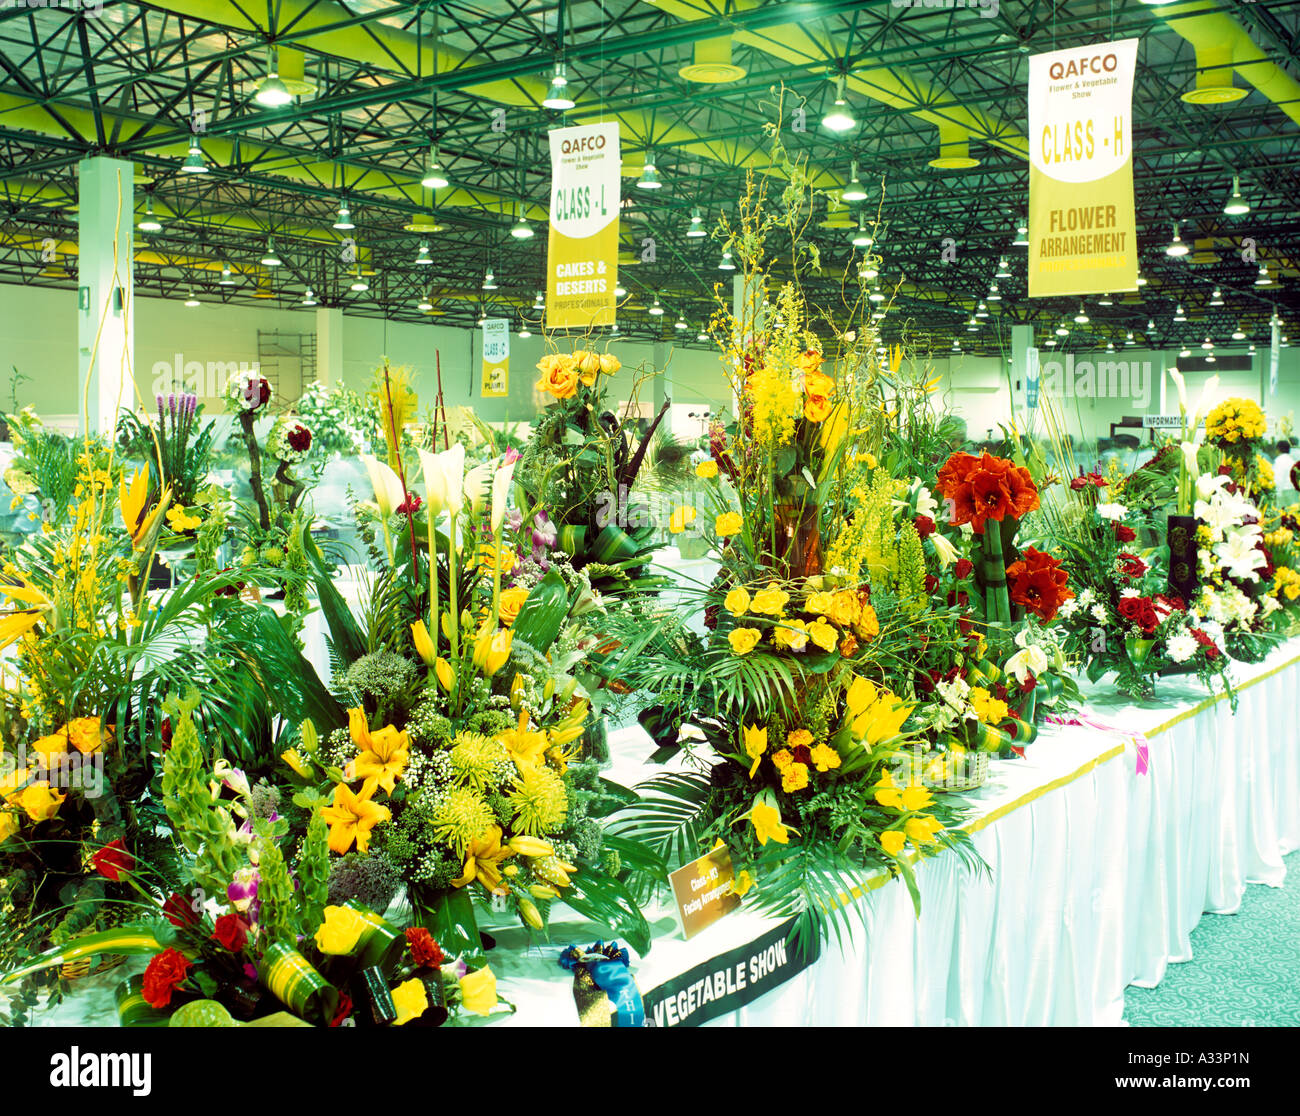 EXHIBITION OF FLOWERS AT INTERNATIONAL CONVENTION CENTRE DOHA QATAR Stock Photo